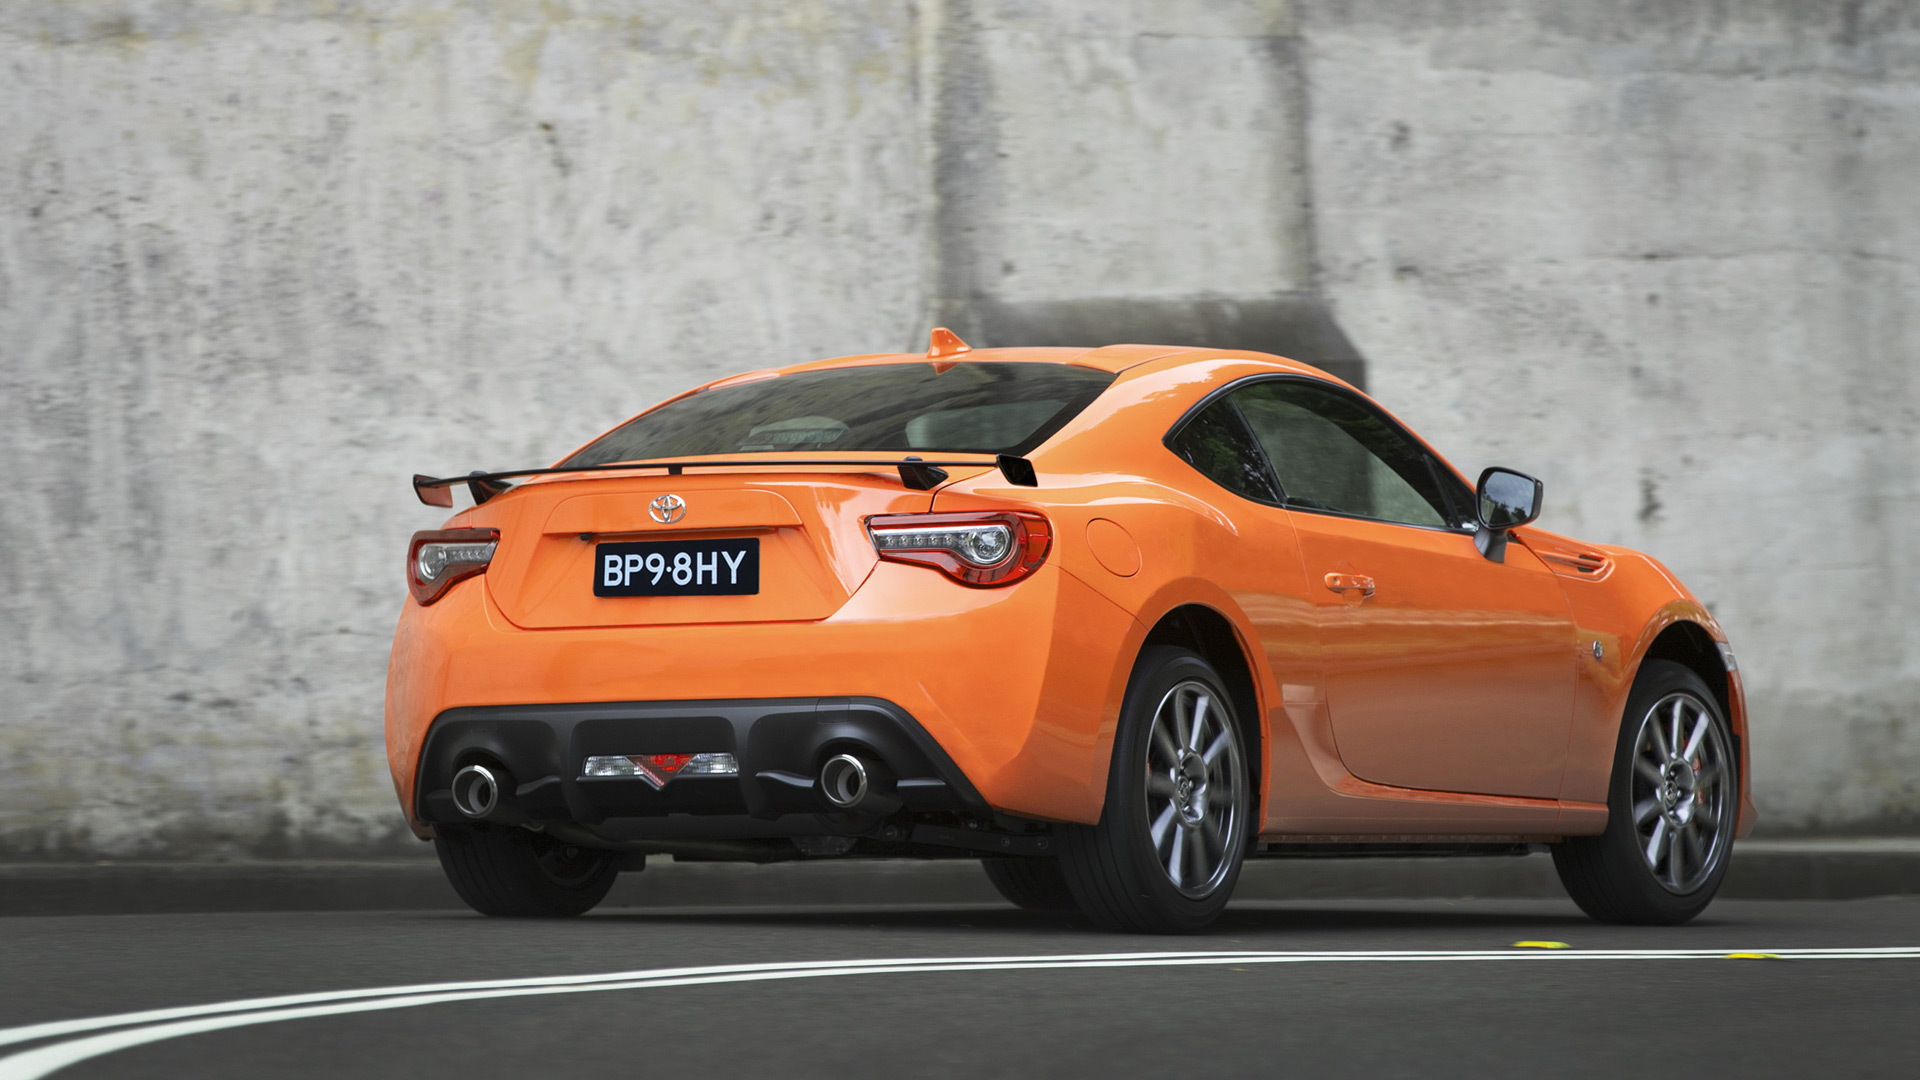 2017 Toyota 86 limited-edition model for Australia